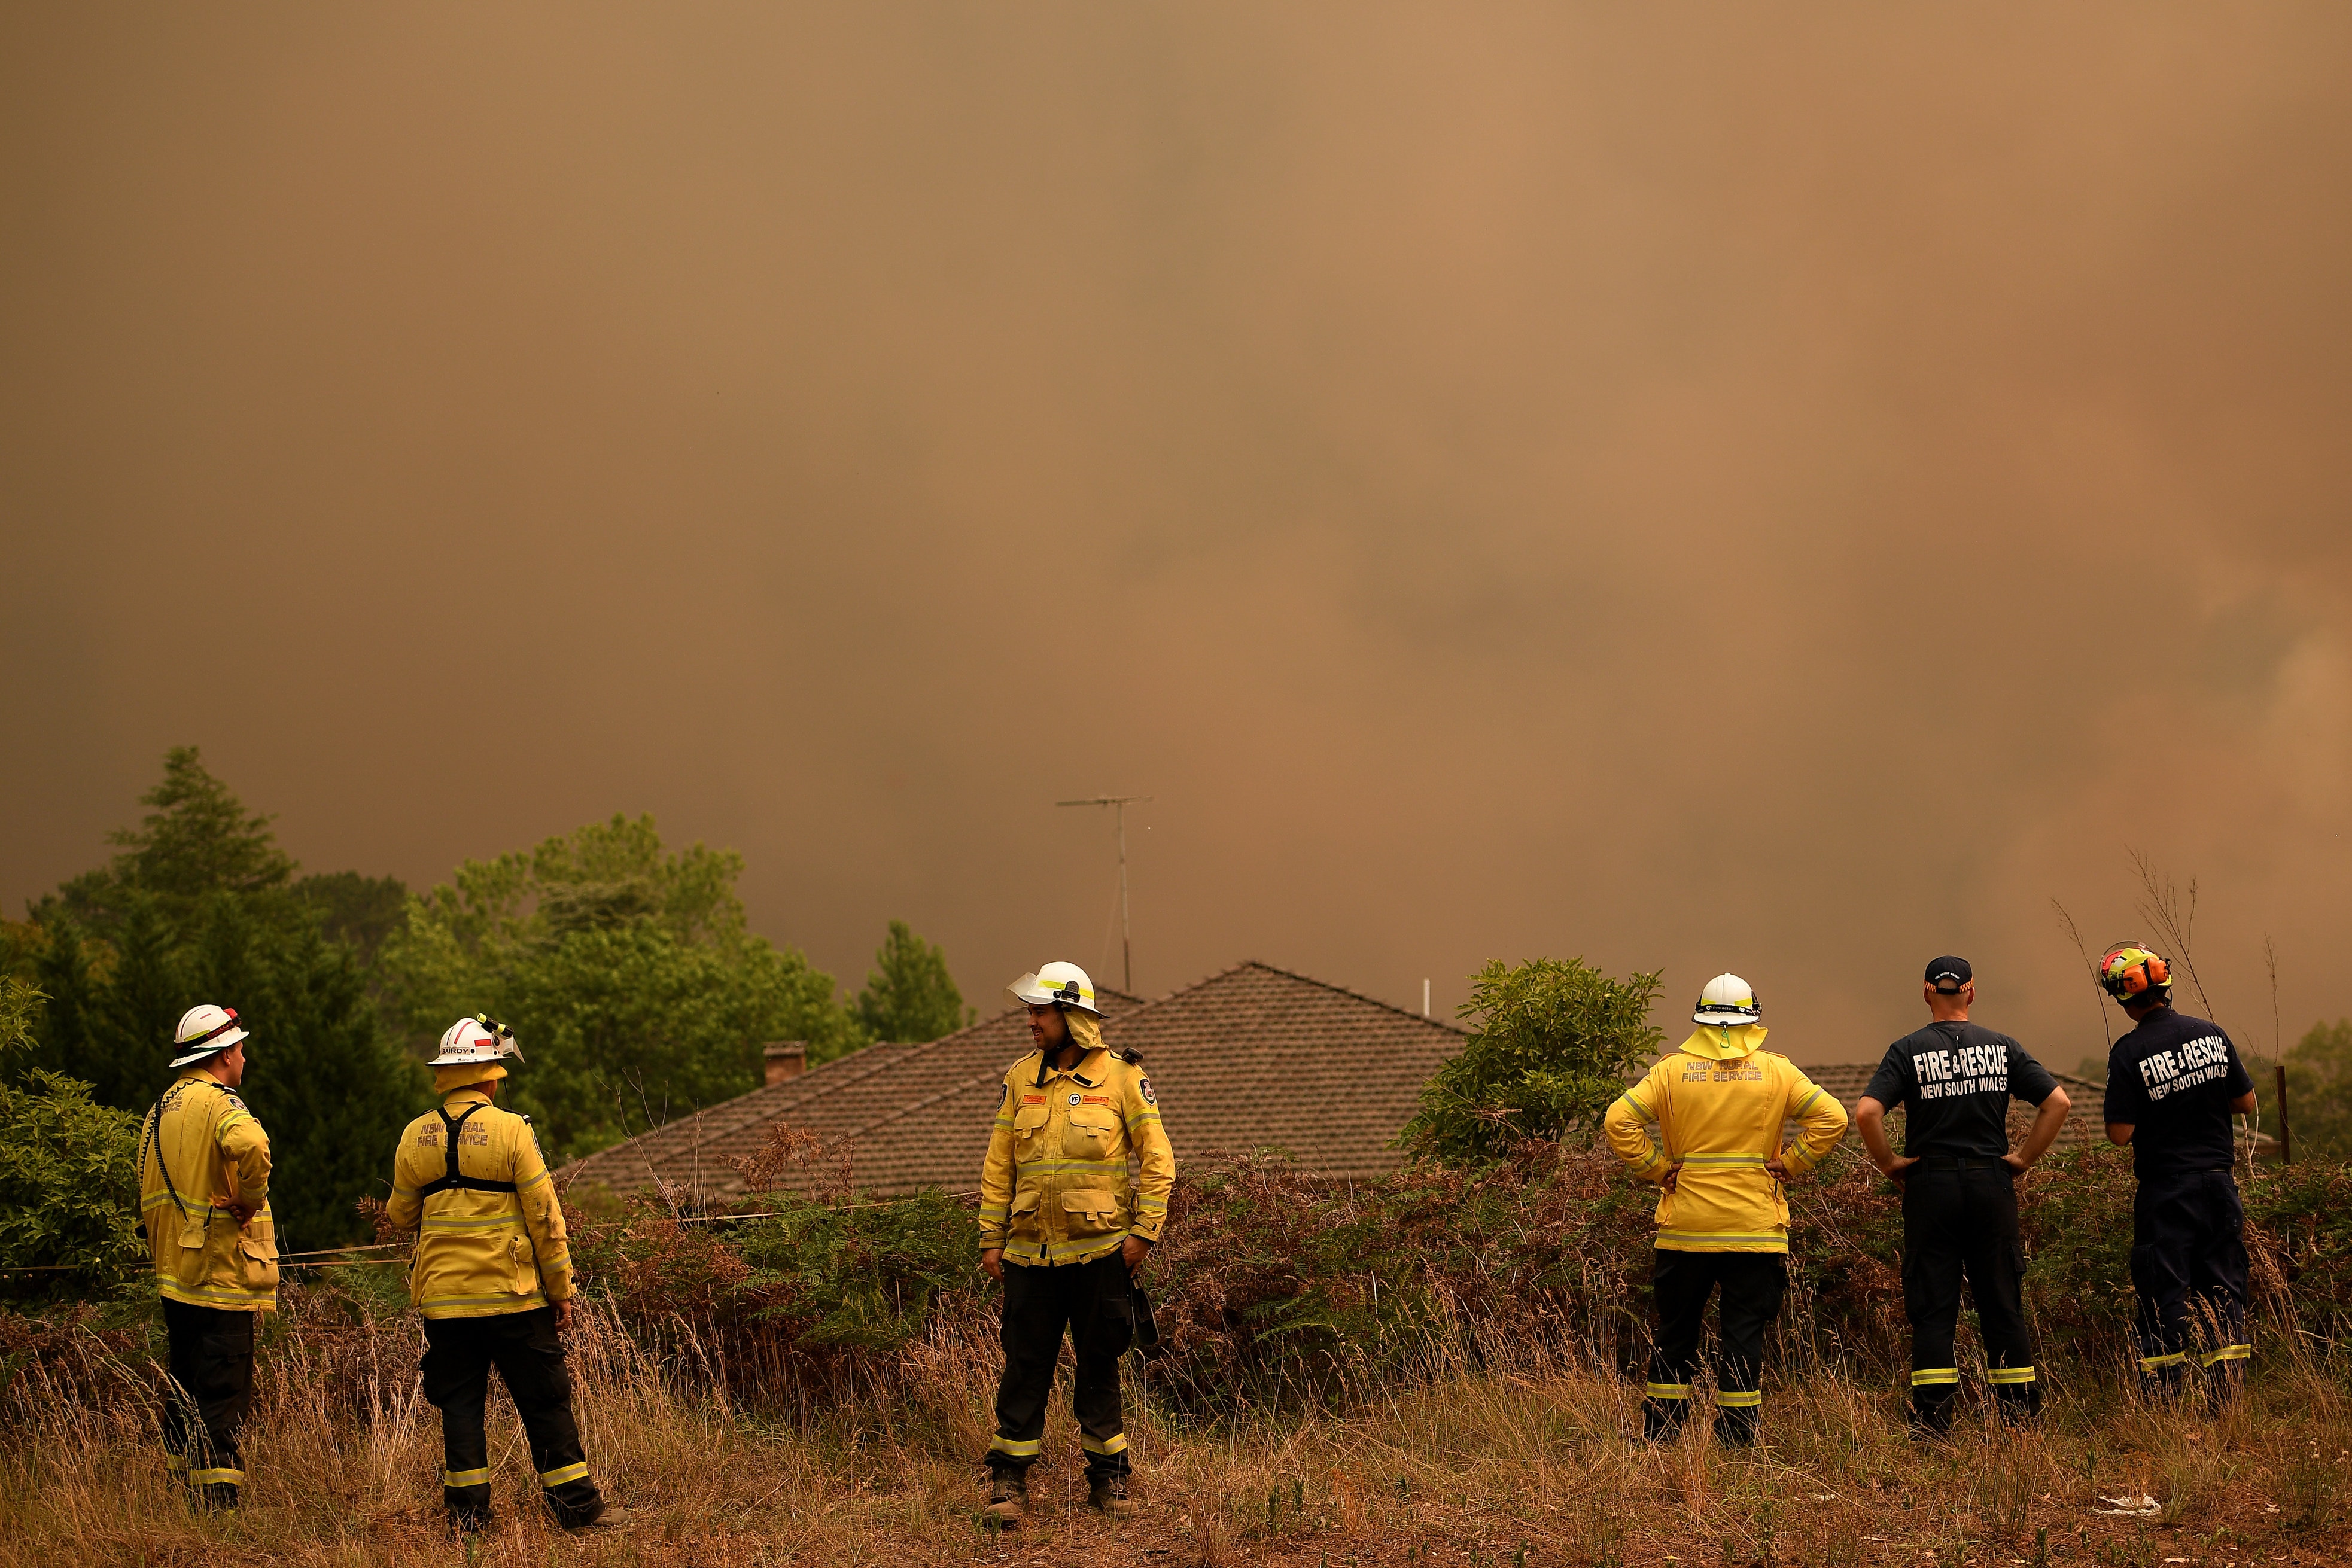 NSW Rural Fire Service and Fire and Rescue NSW firefighters observe as the Grose Valley Fire approaches Kurrajong Heights.